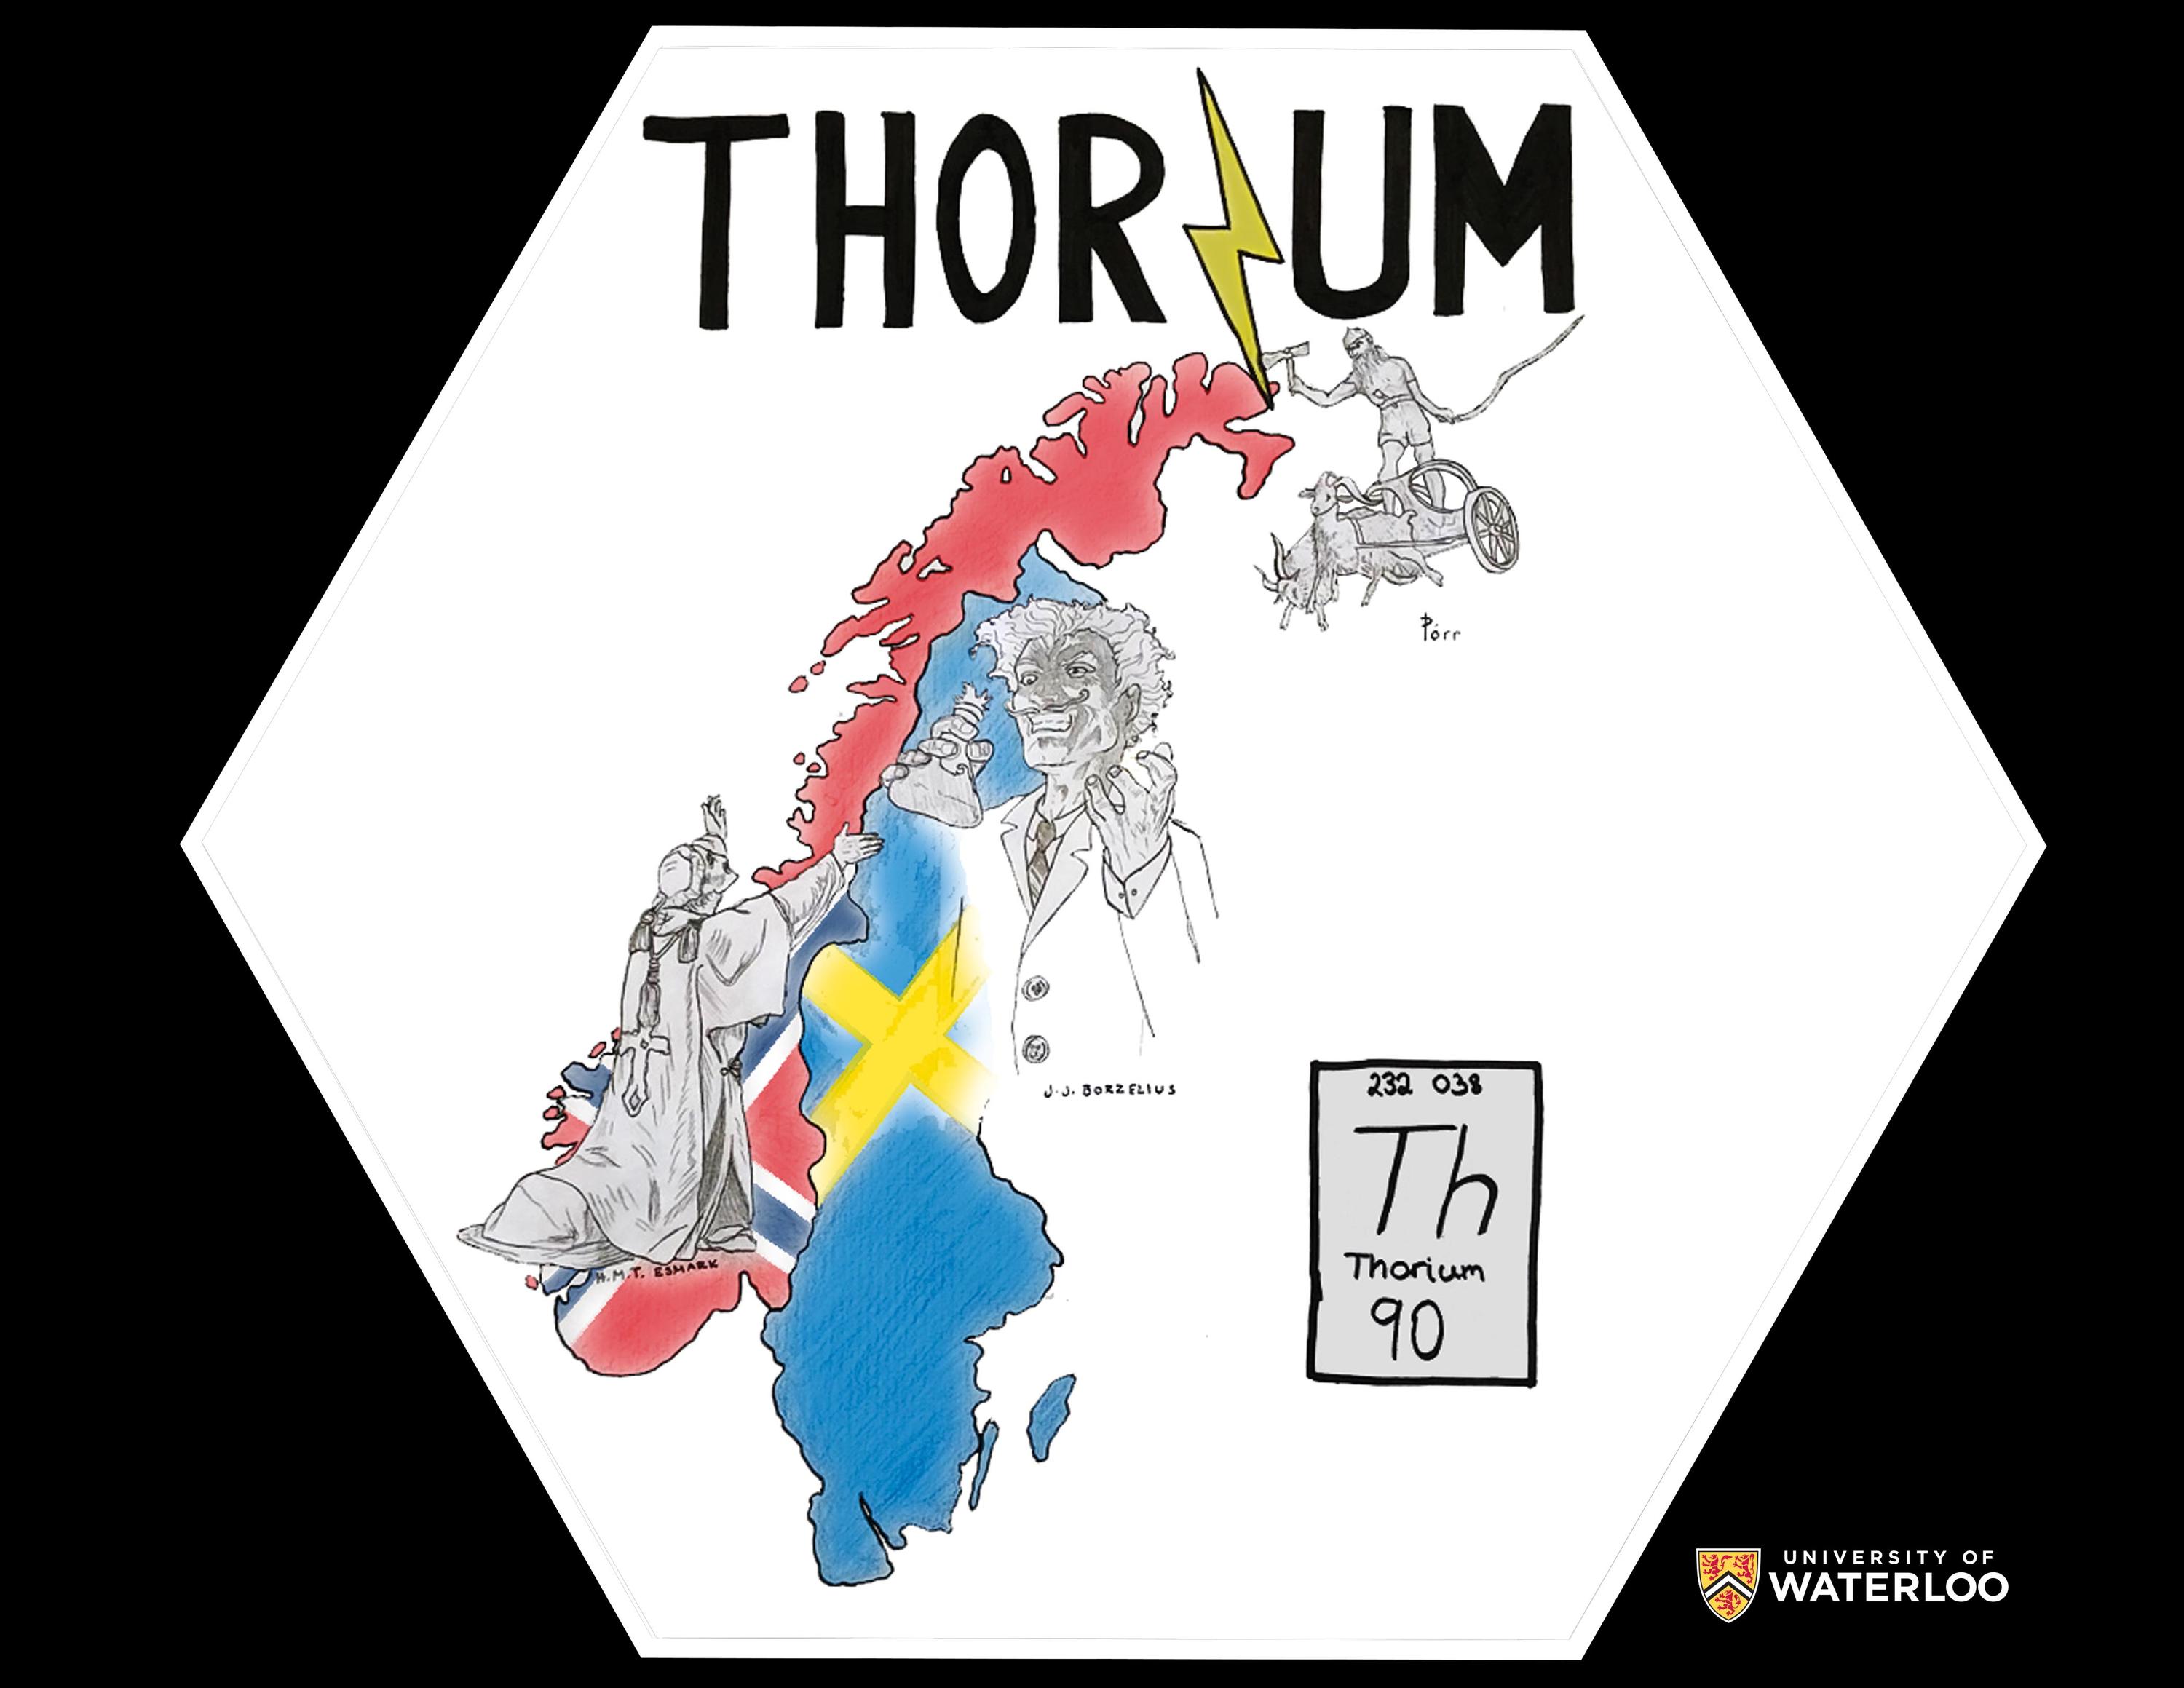  Thrane Esmark, Jöns Jacob Berzelius, and Thor, the Norse god of thunder. Bottom right is the periodic table tile with the chemical symbol “Th”, “232.038” and “90”.